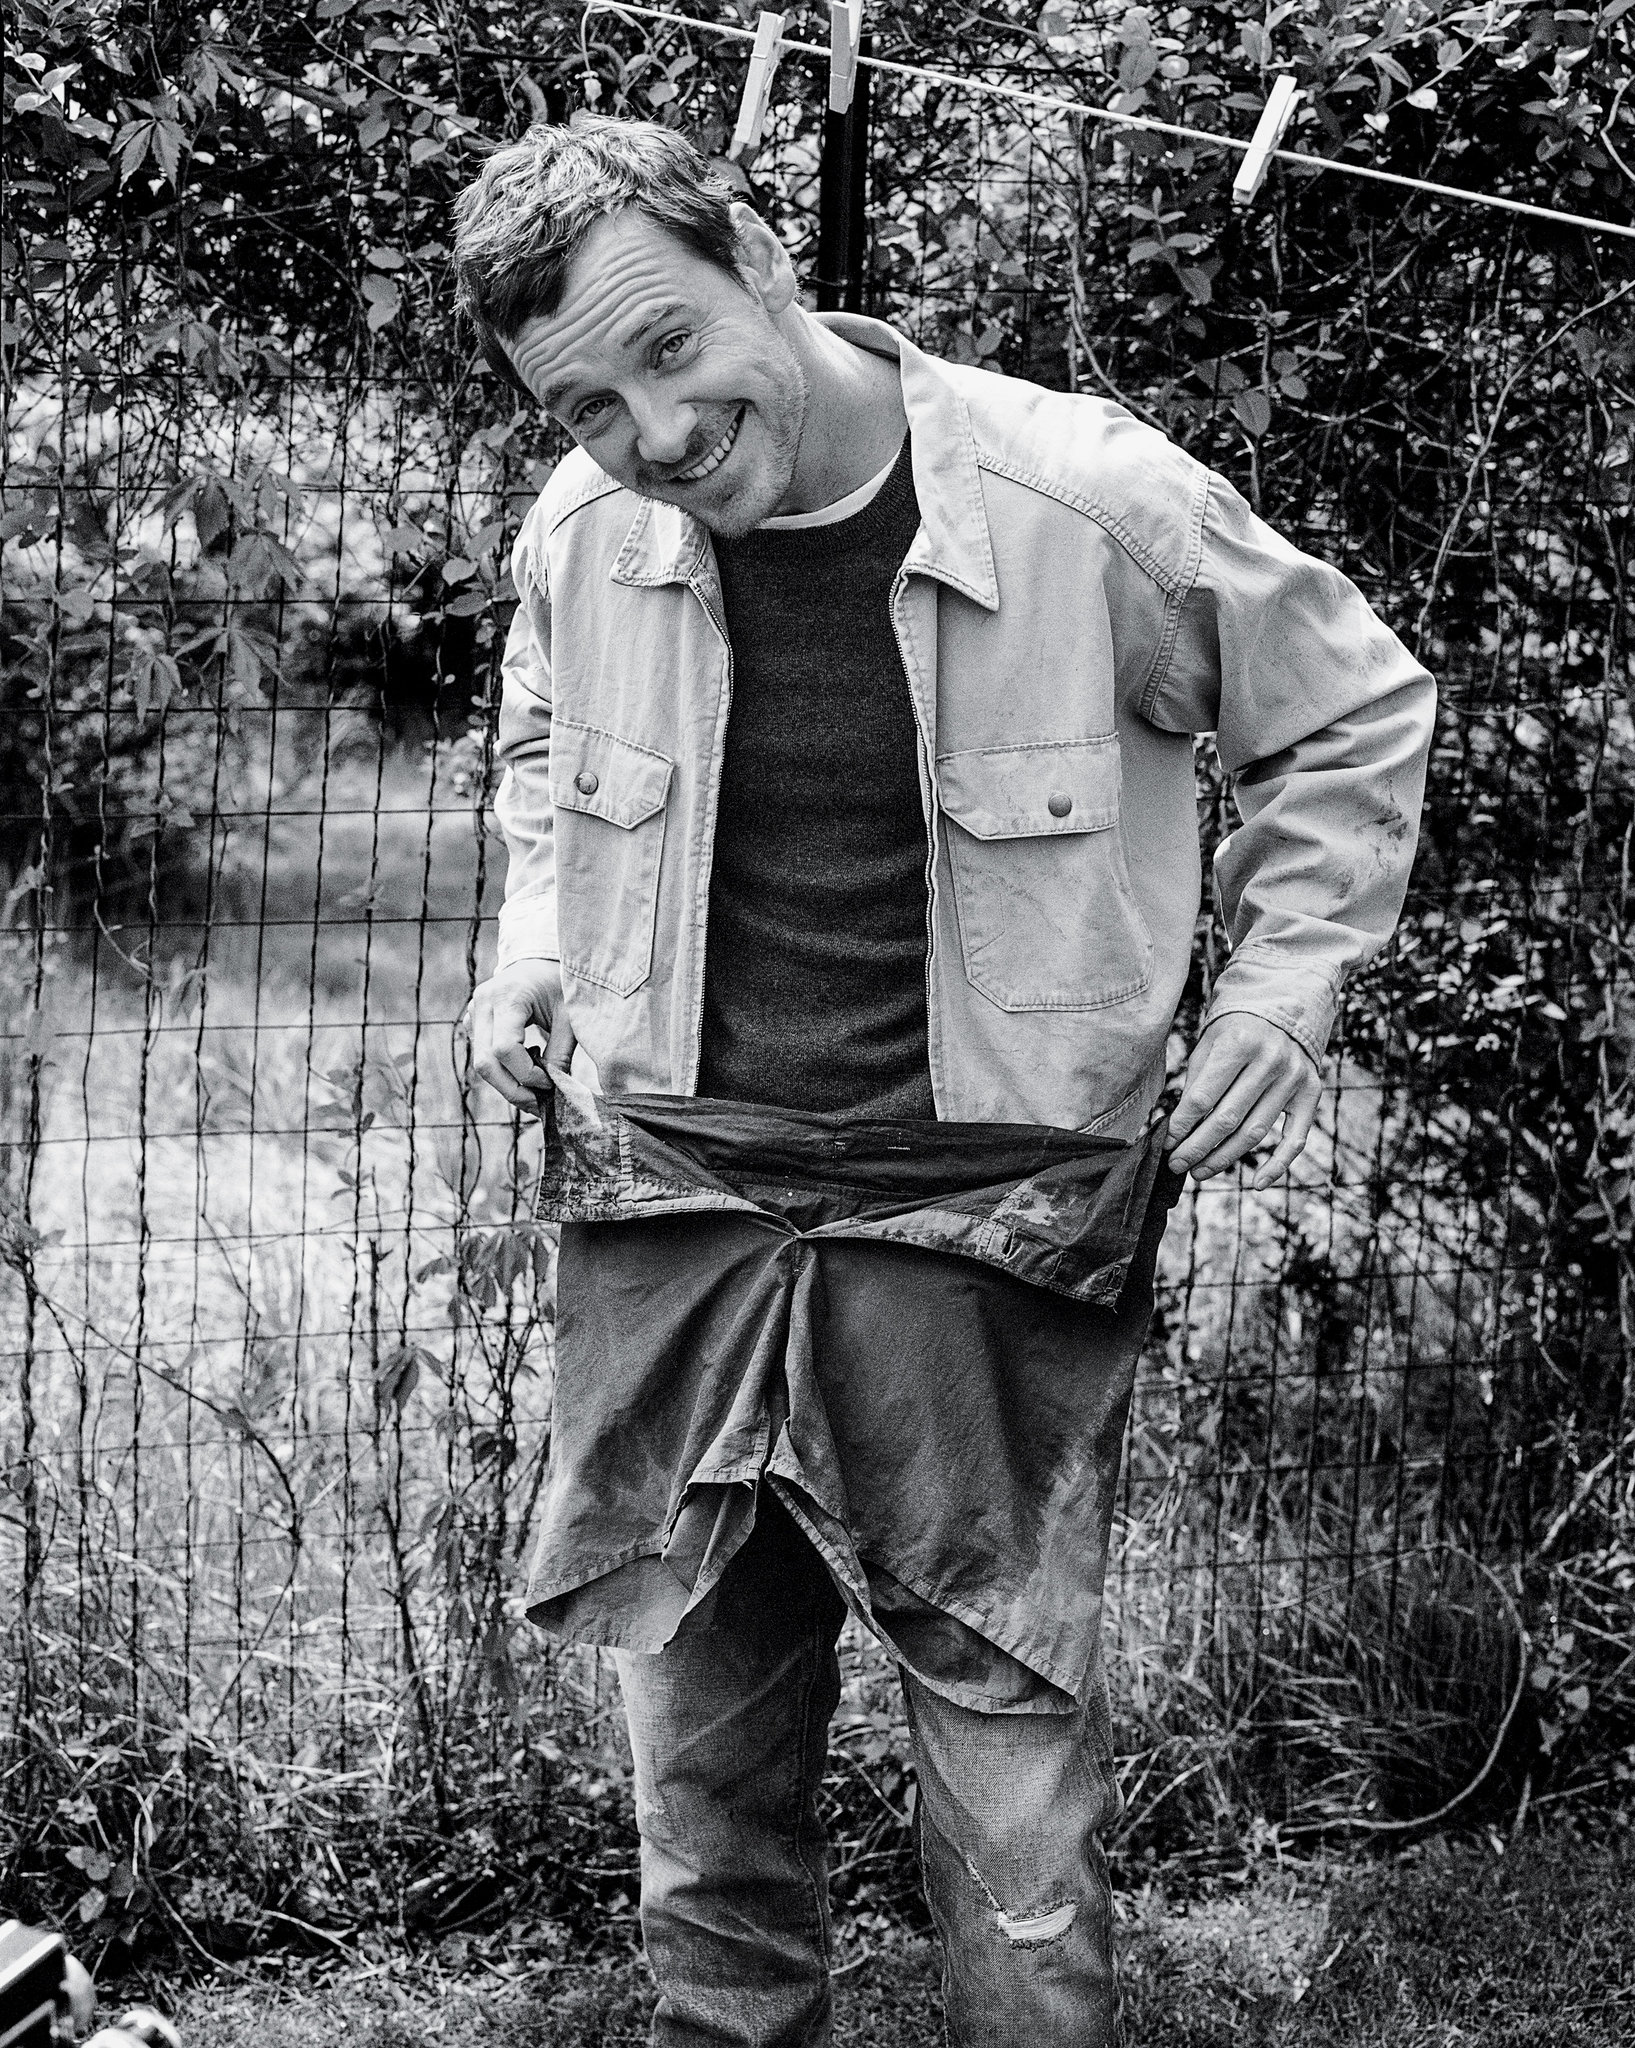 Michael Fassbender T Magazine New York Times Style 2015 Cover Photo Shoot 002